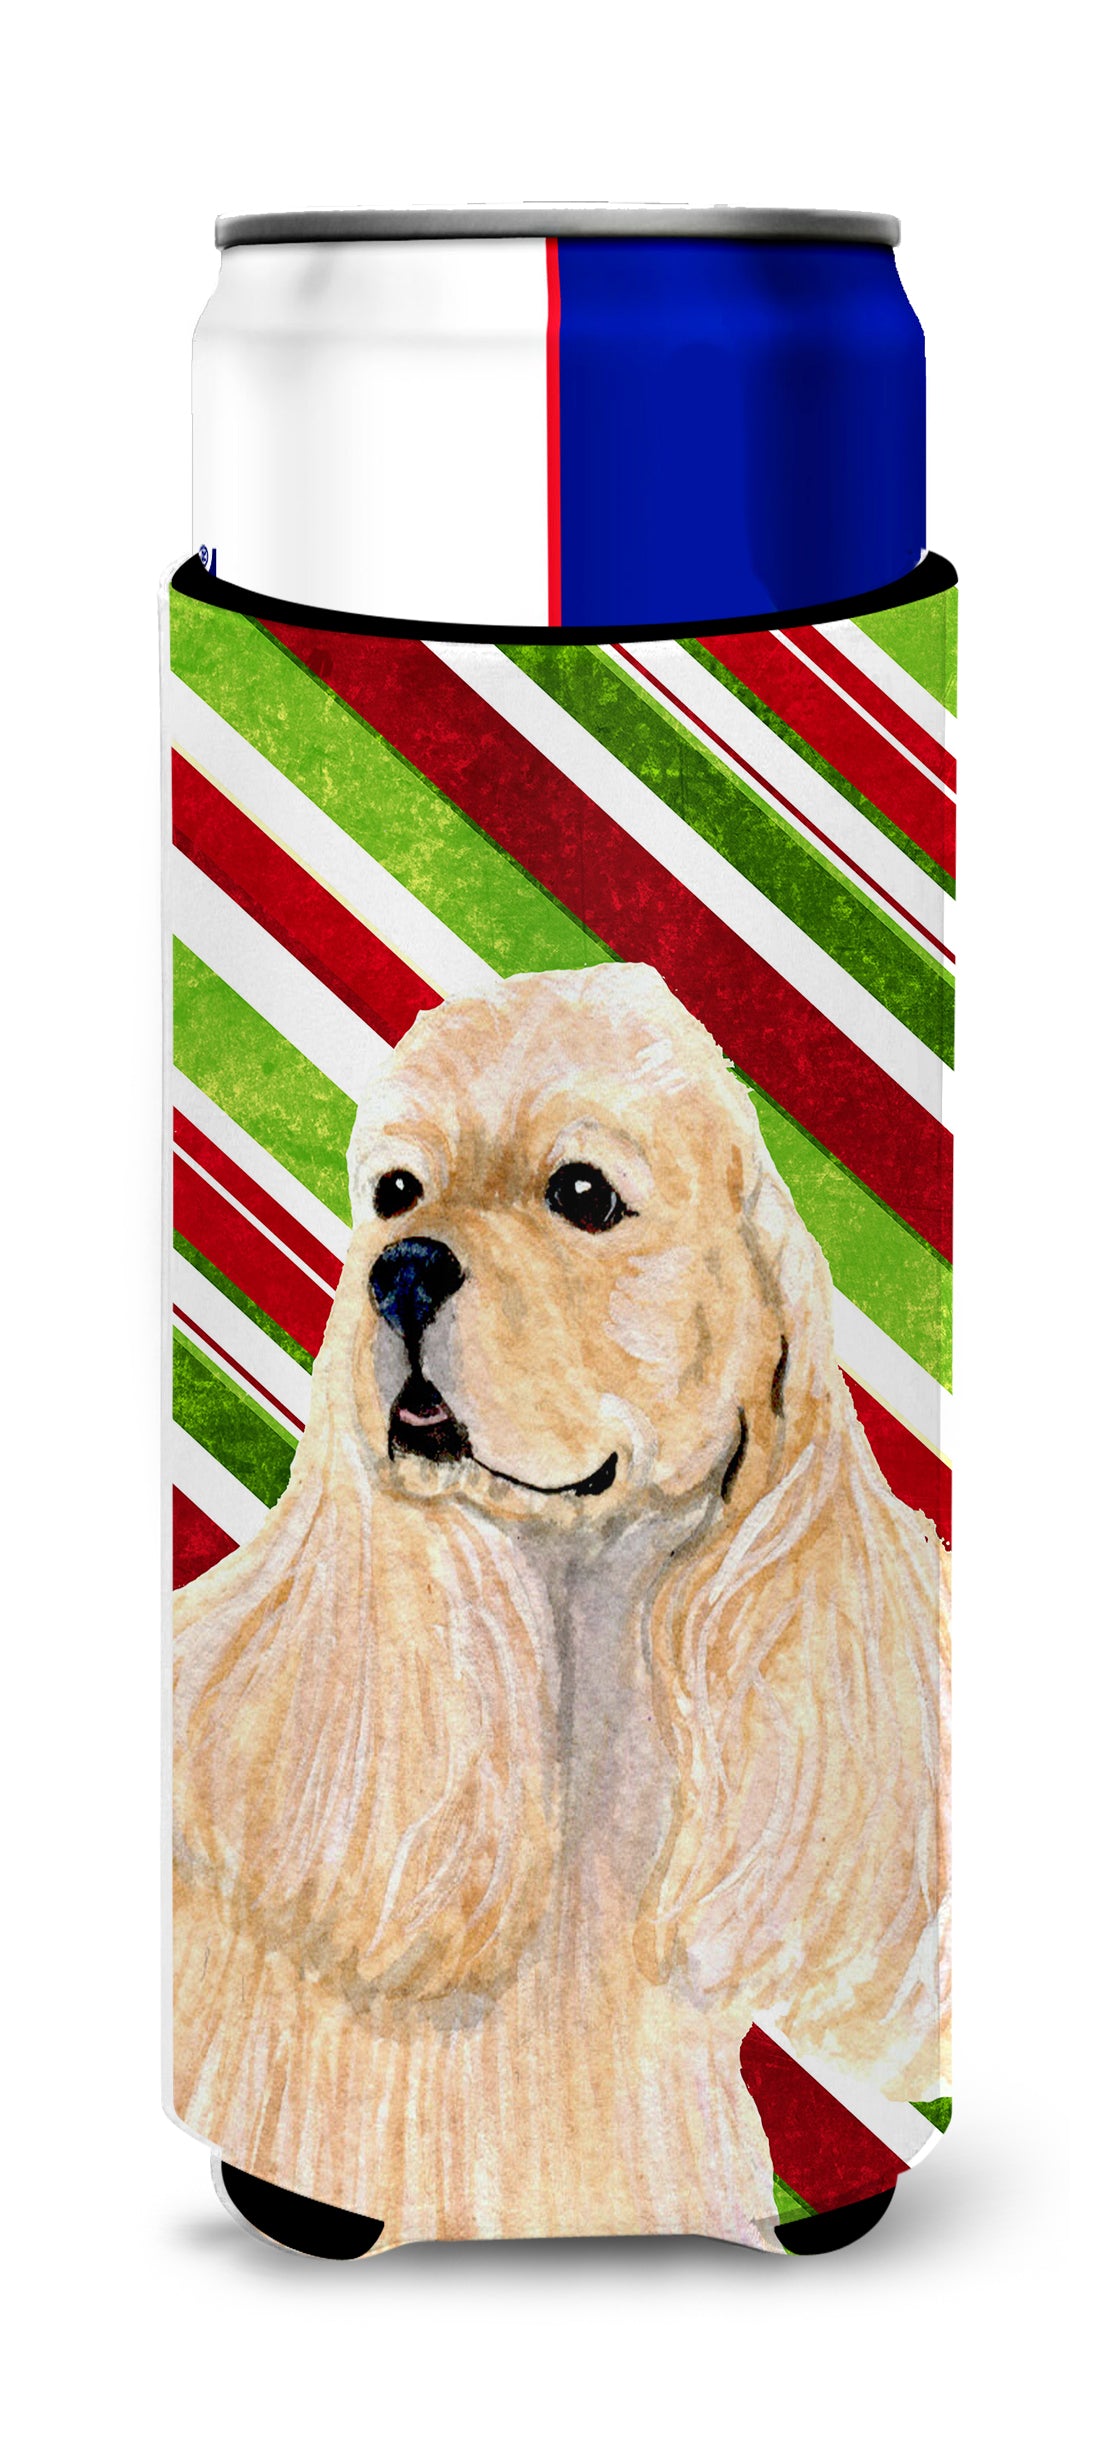 Cocker Spaniel Candy Cane Holiday Christmas Ultra Beverage Insulators for slim cans SS4591MUK.